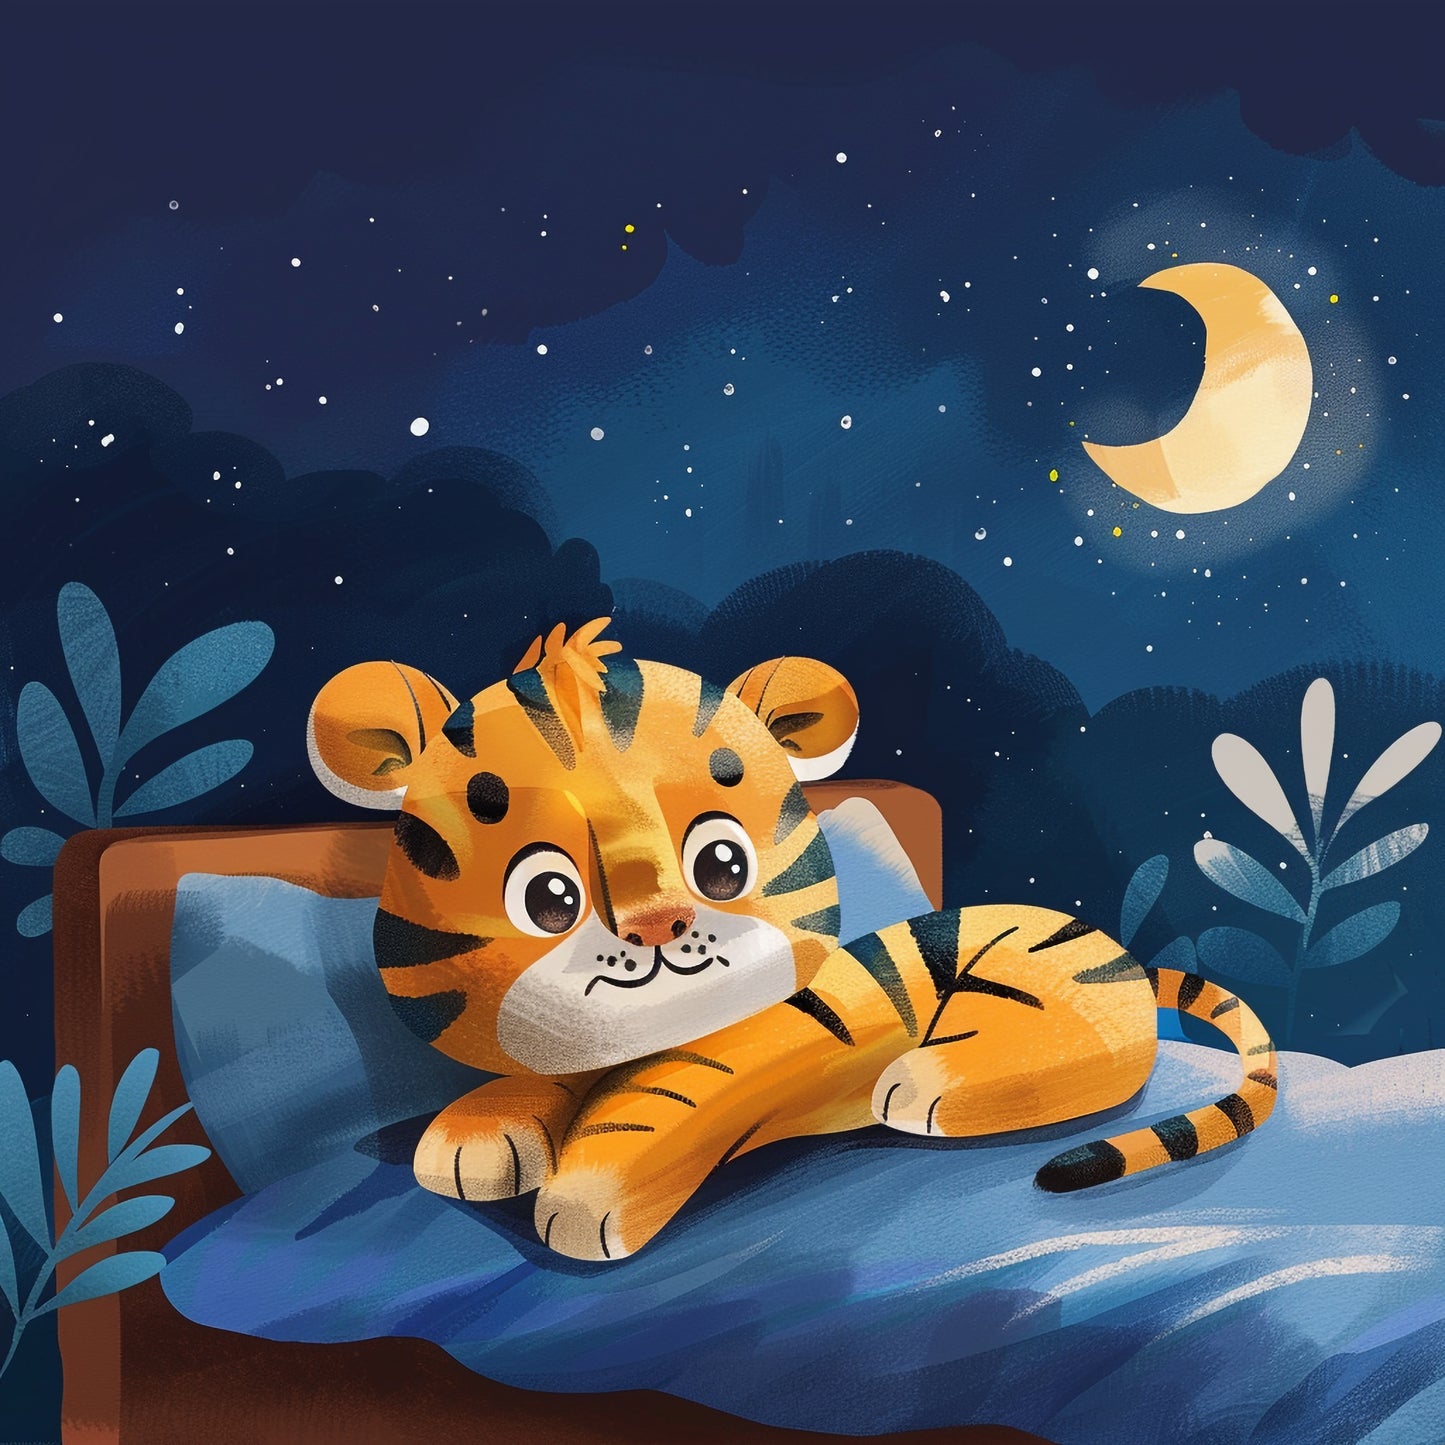 Adorable Baby Tiger Resting in a Cozy Bedroom at Night